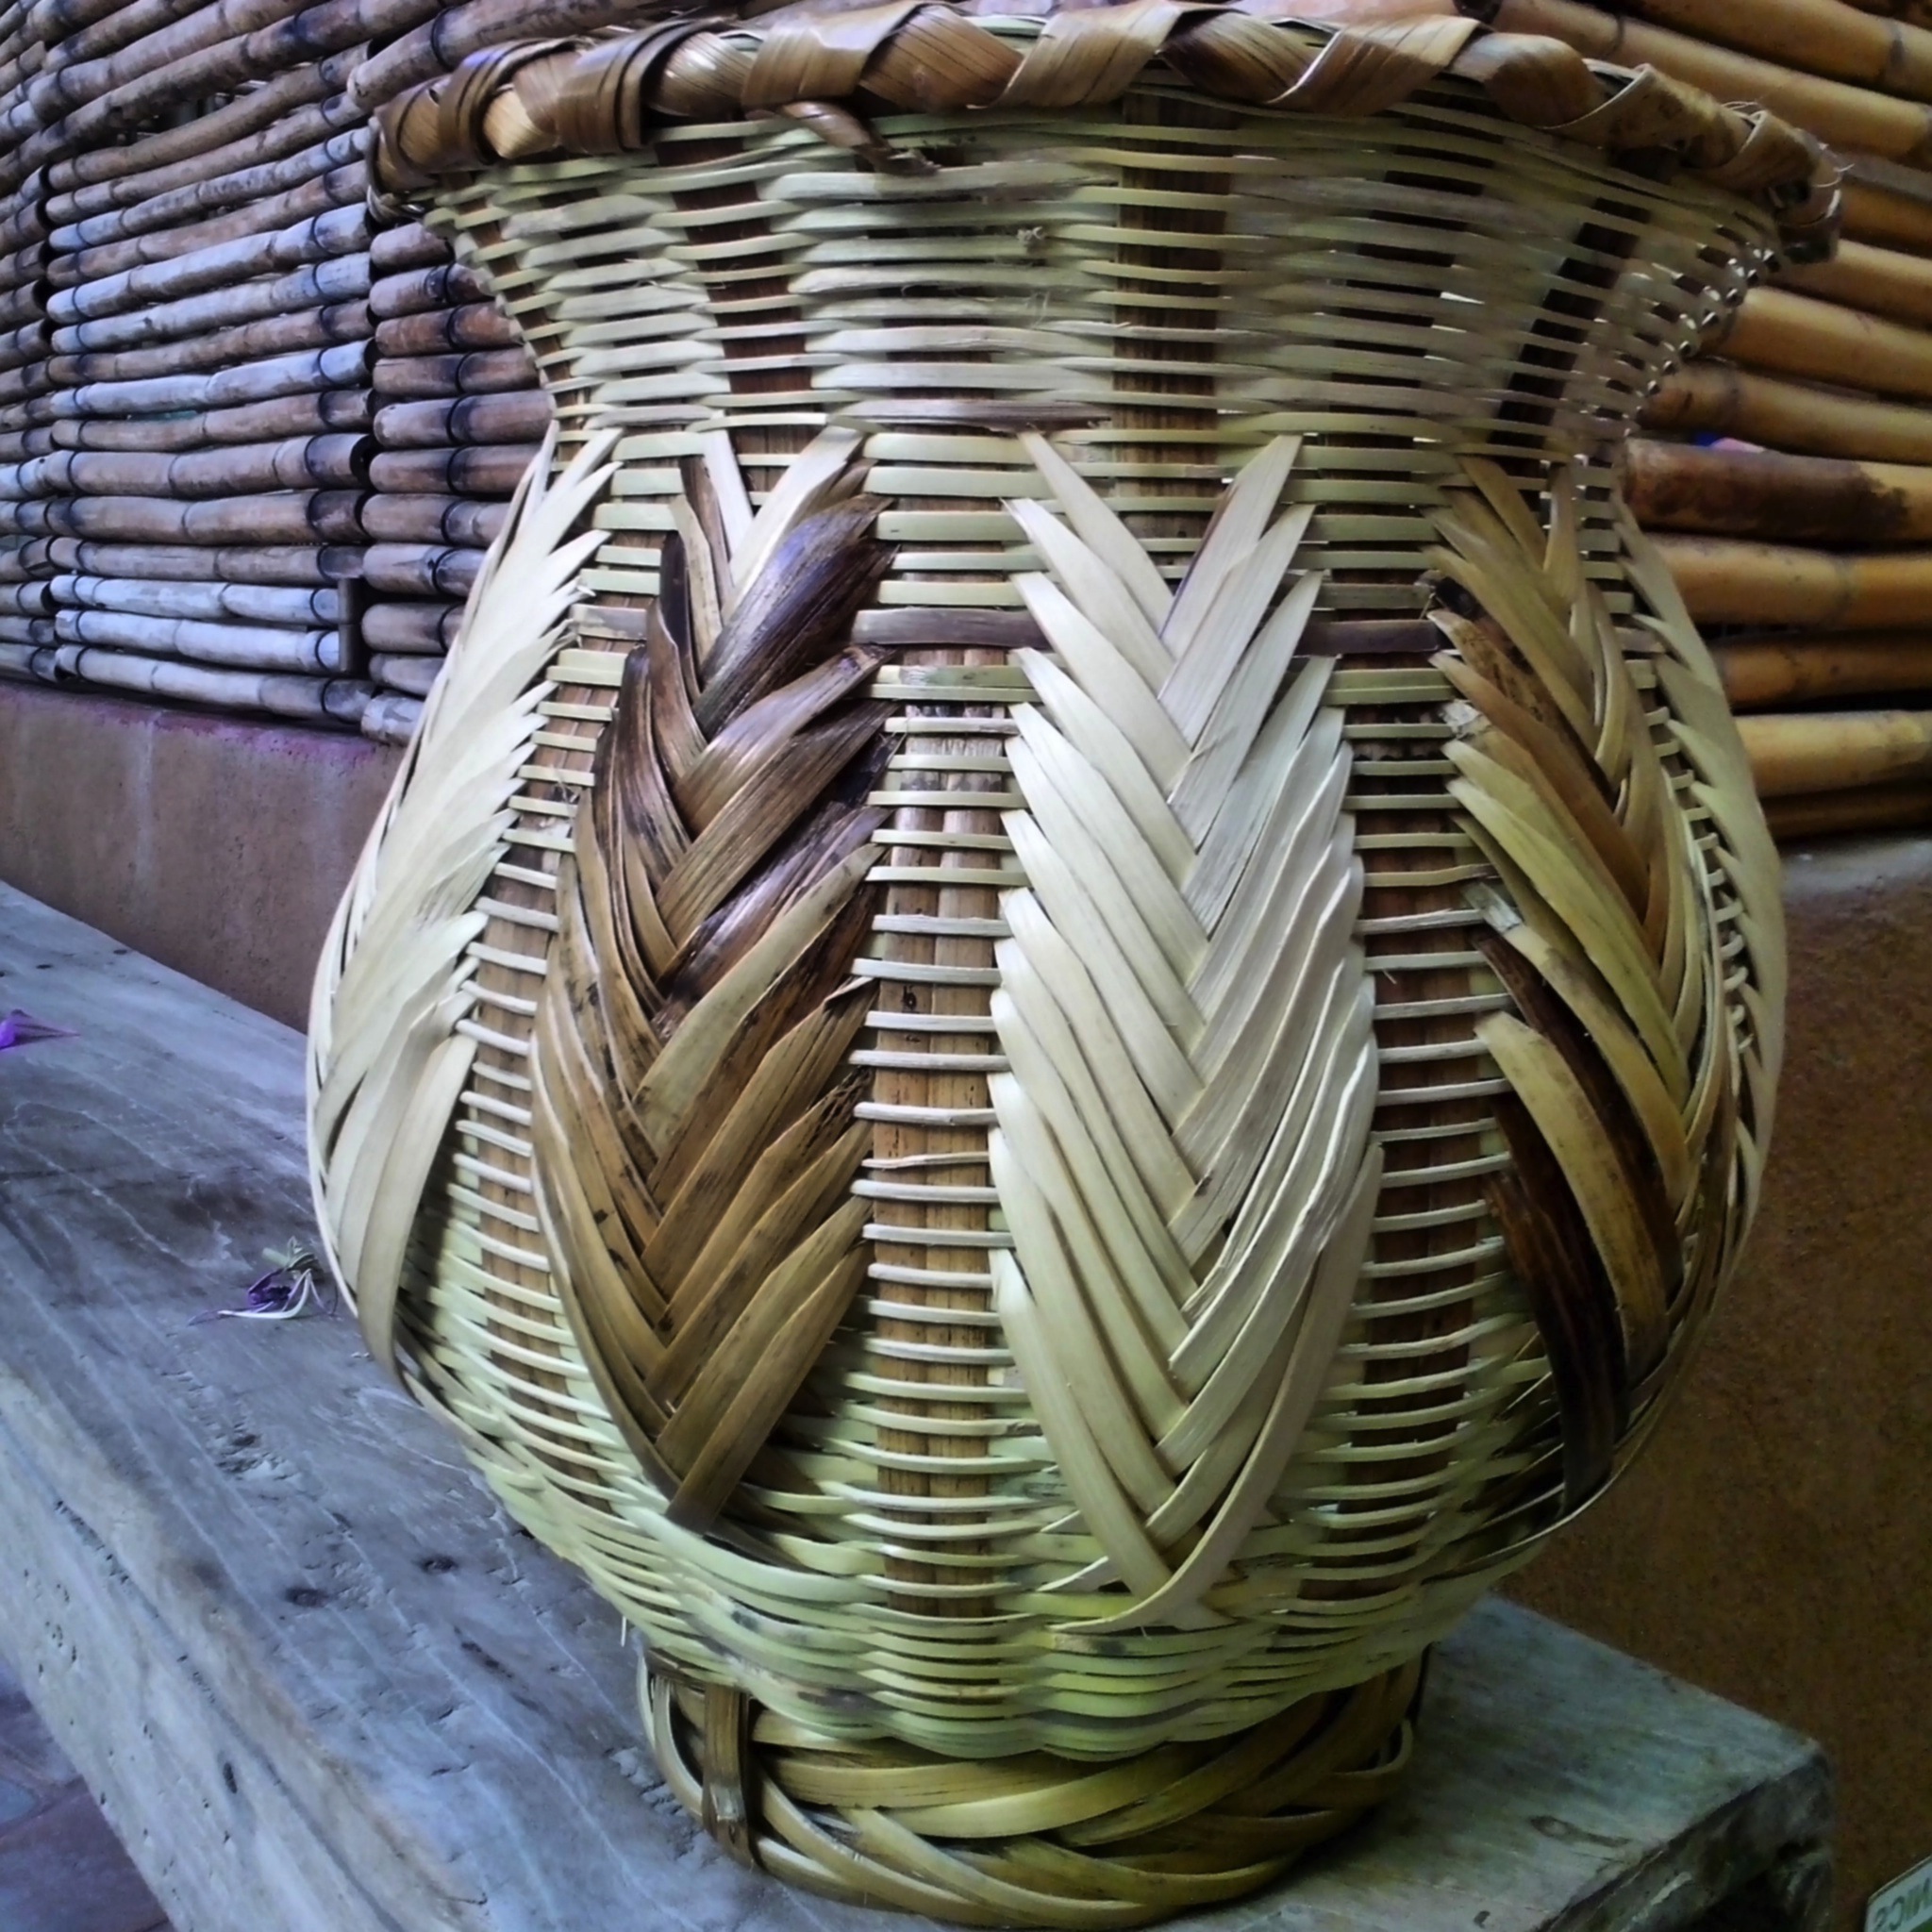 First basket complete with decorative motif